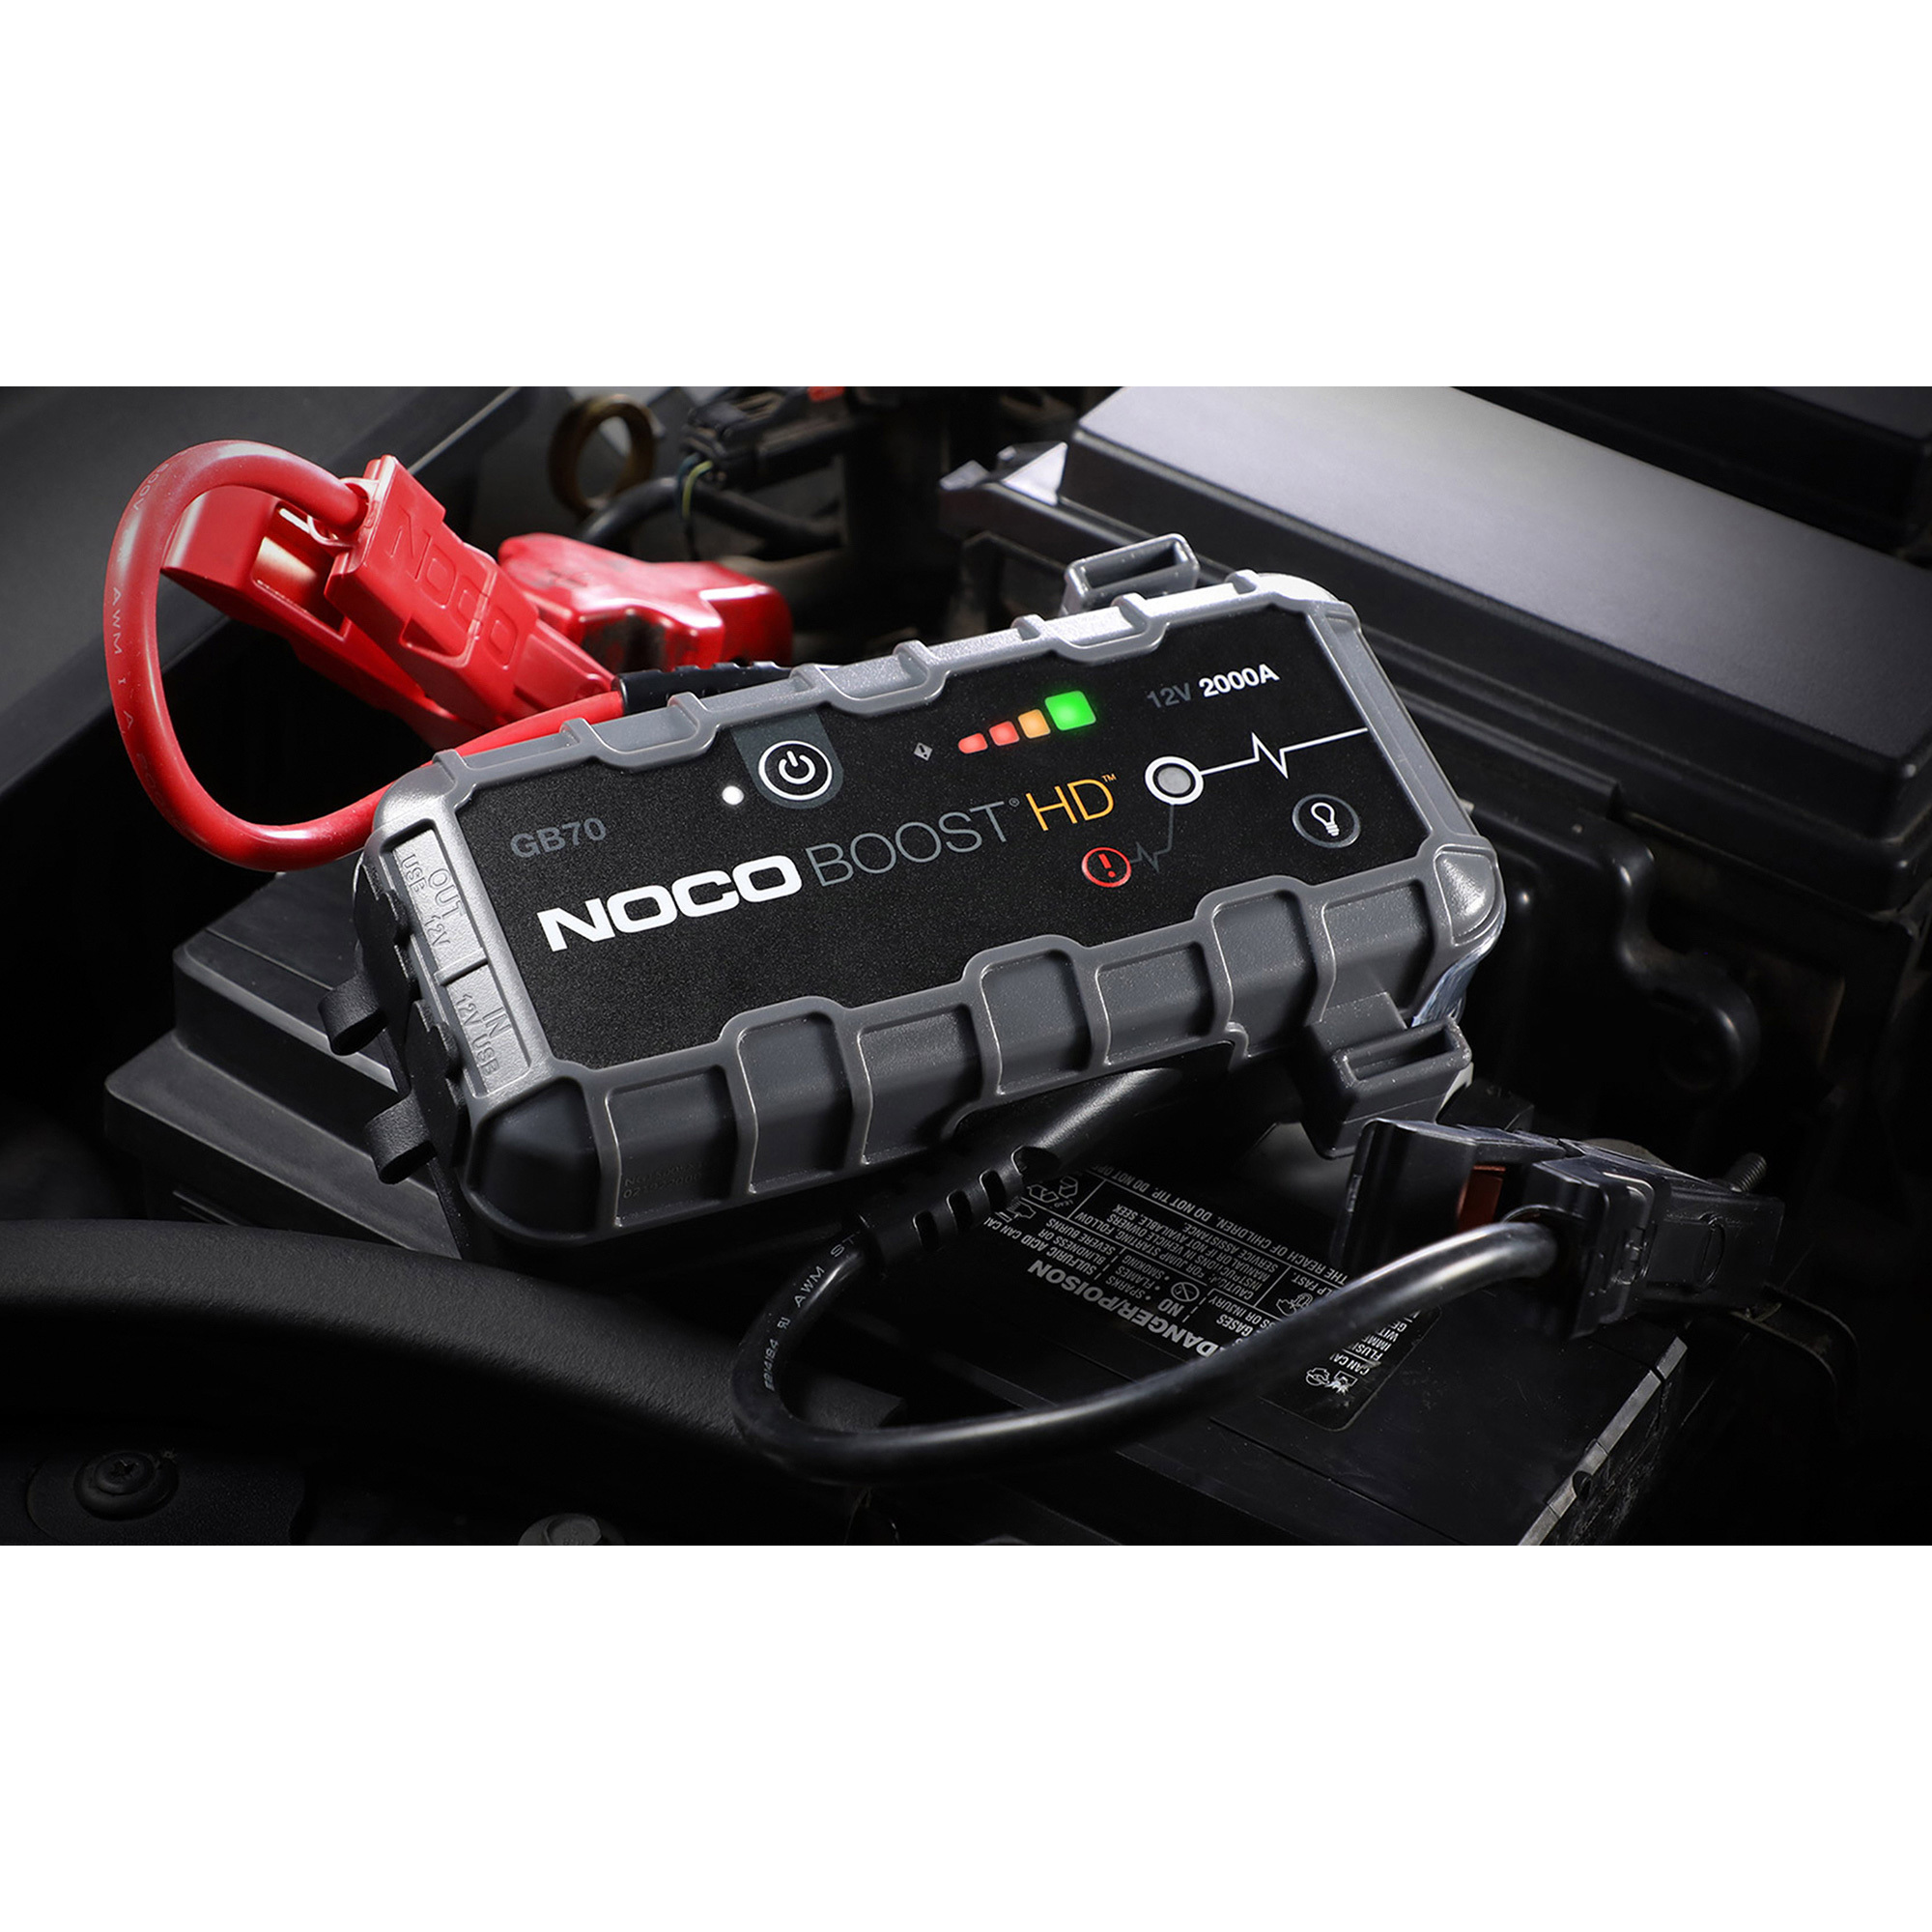 Noco Genius BoostHD Heavy-Duty Compact Lithium-Ion Jump Starter — 2000 Amps,  Model# GB70